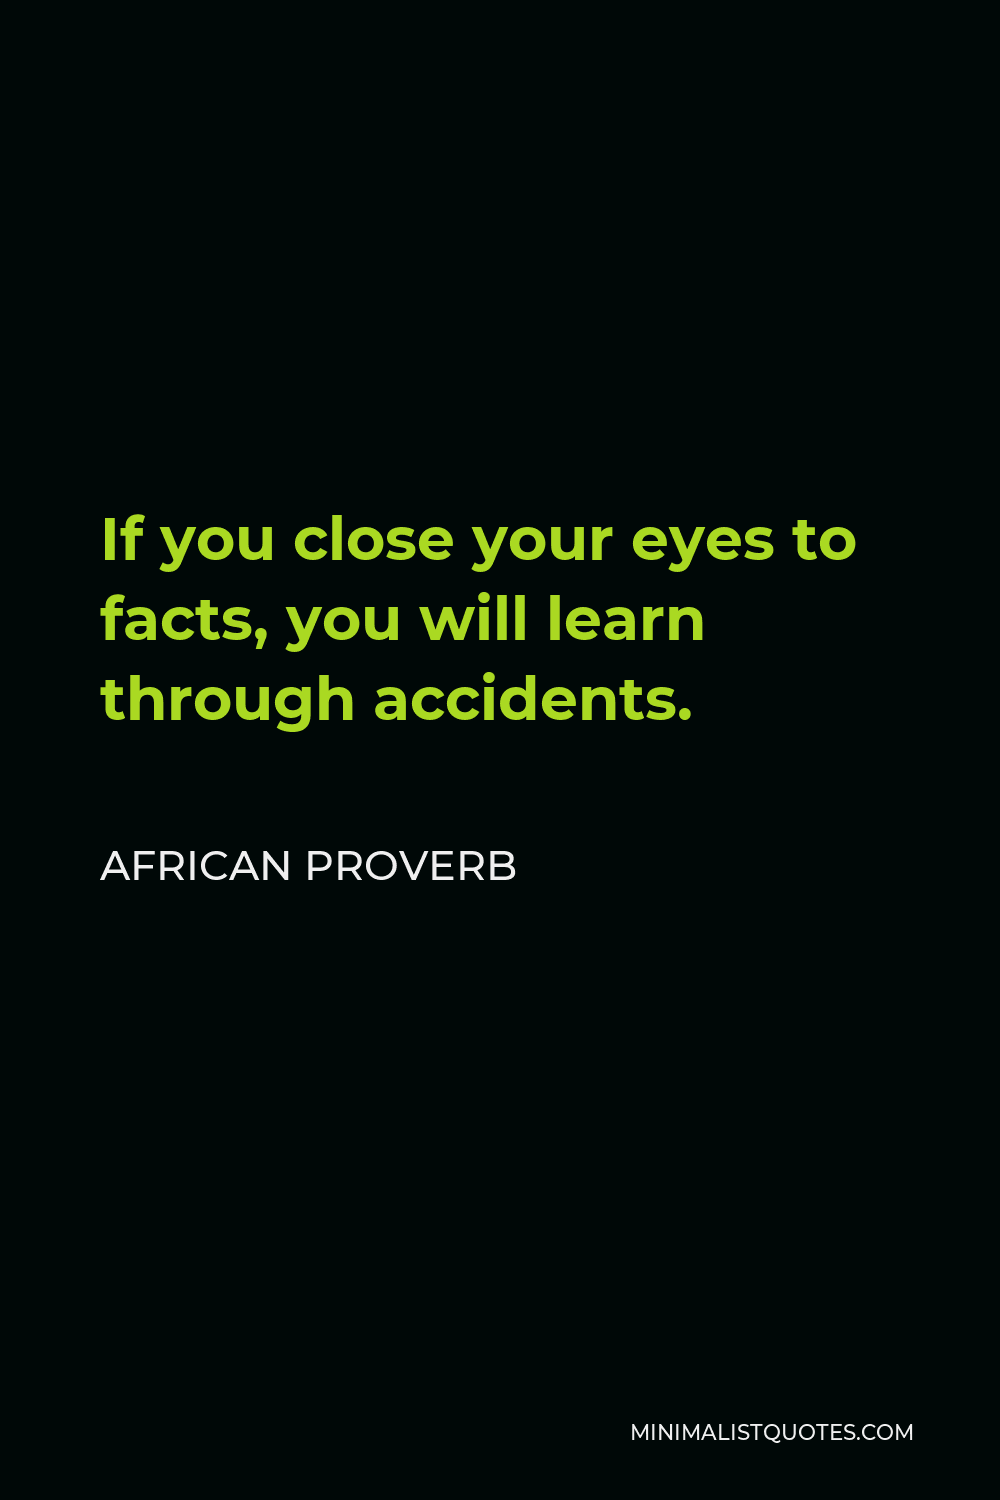 African Proverb Quote - If you close your eyes to facts, you will learn through accidents.